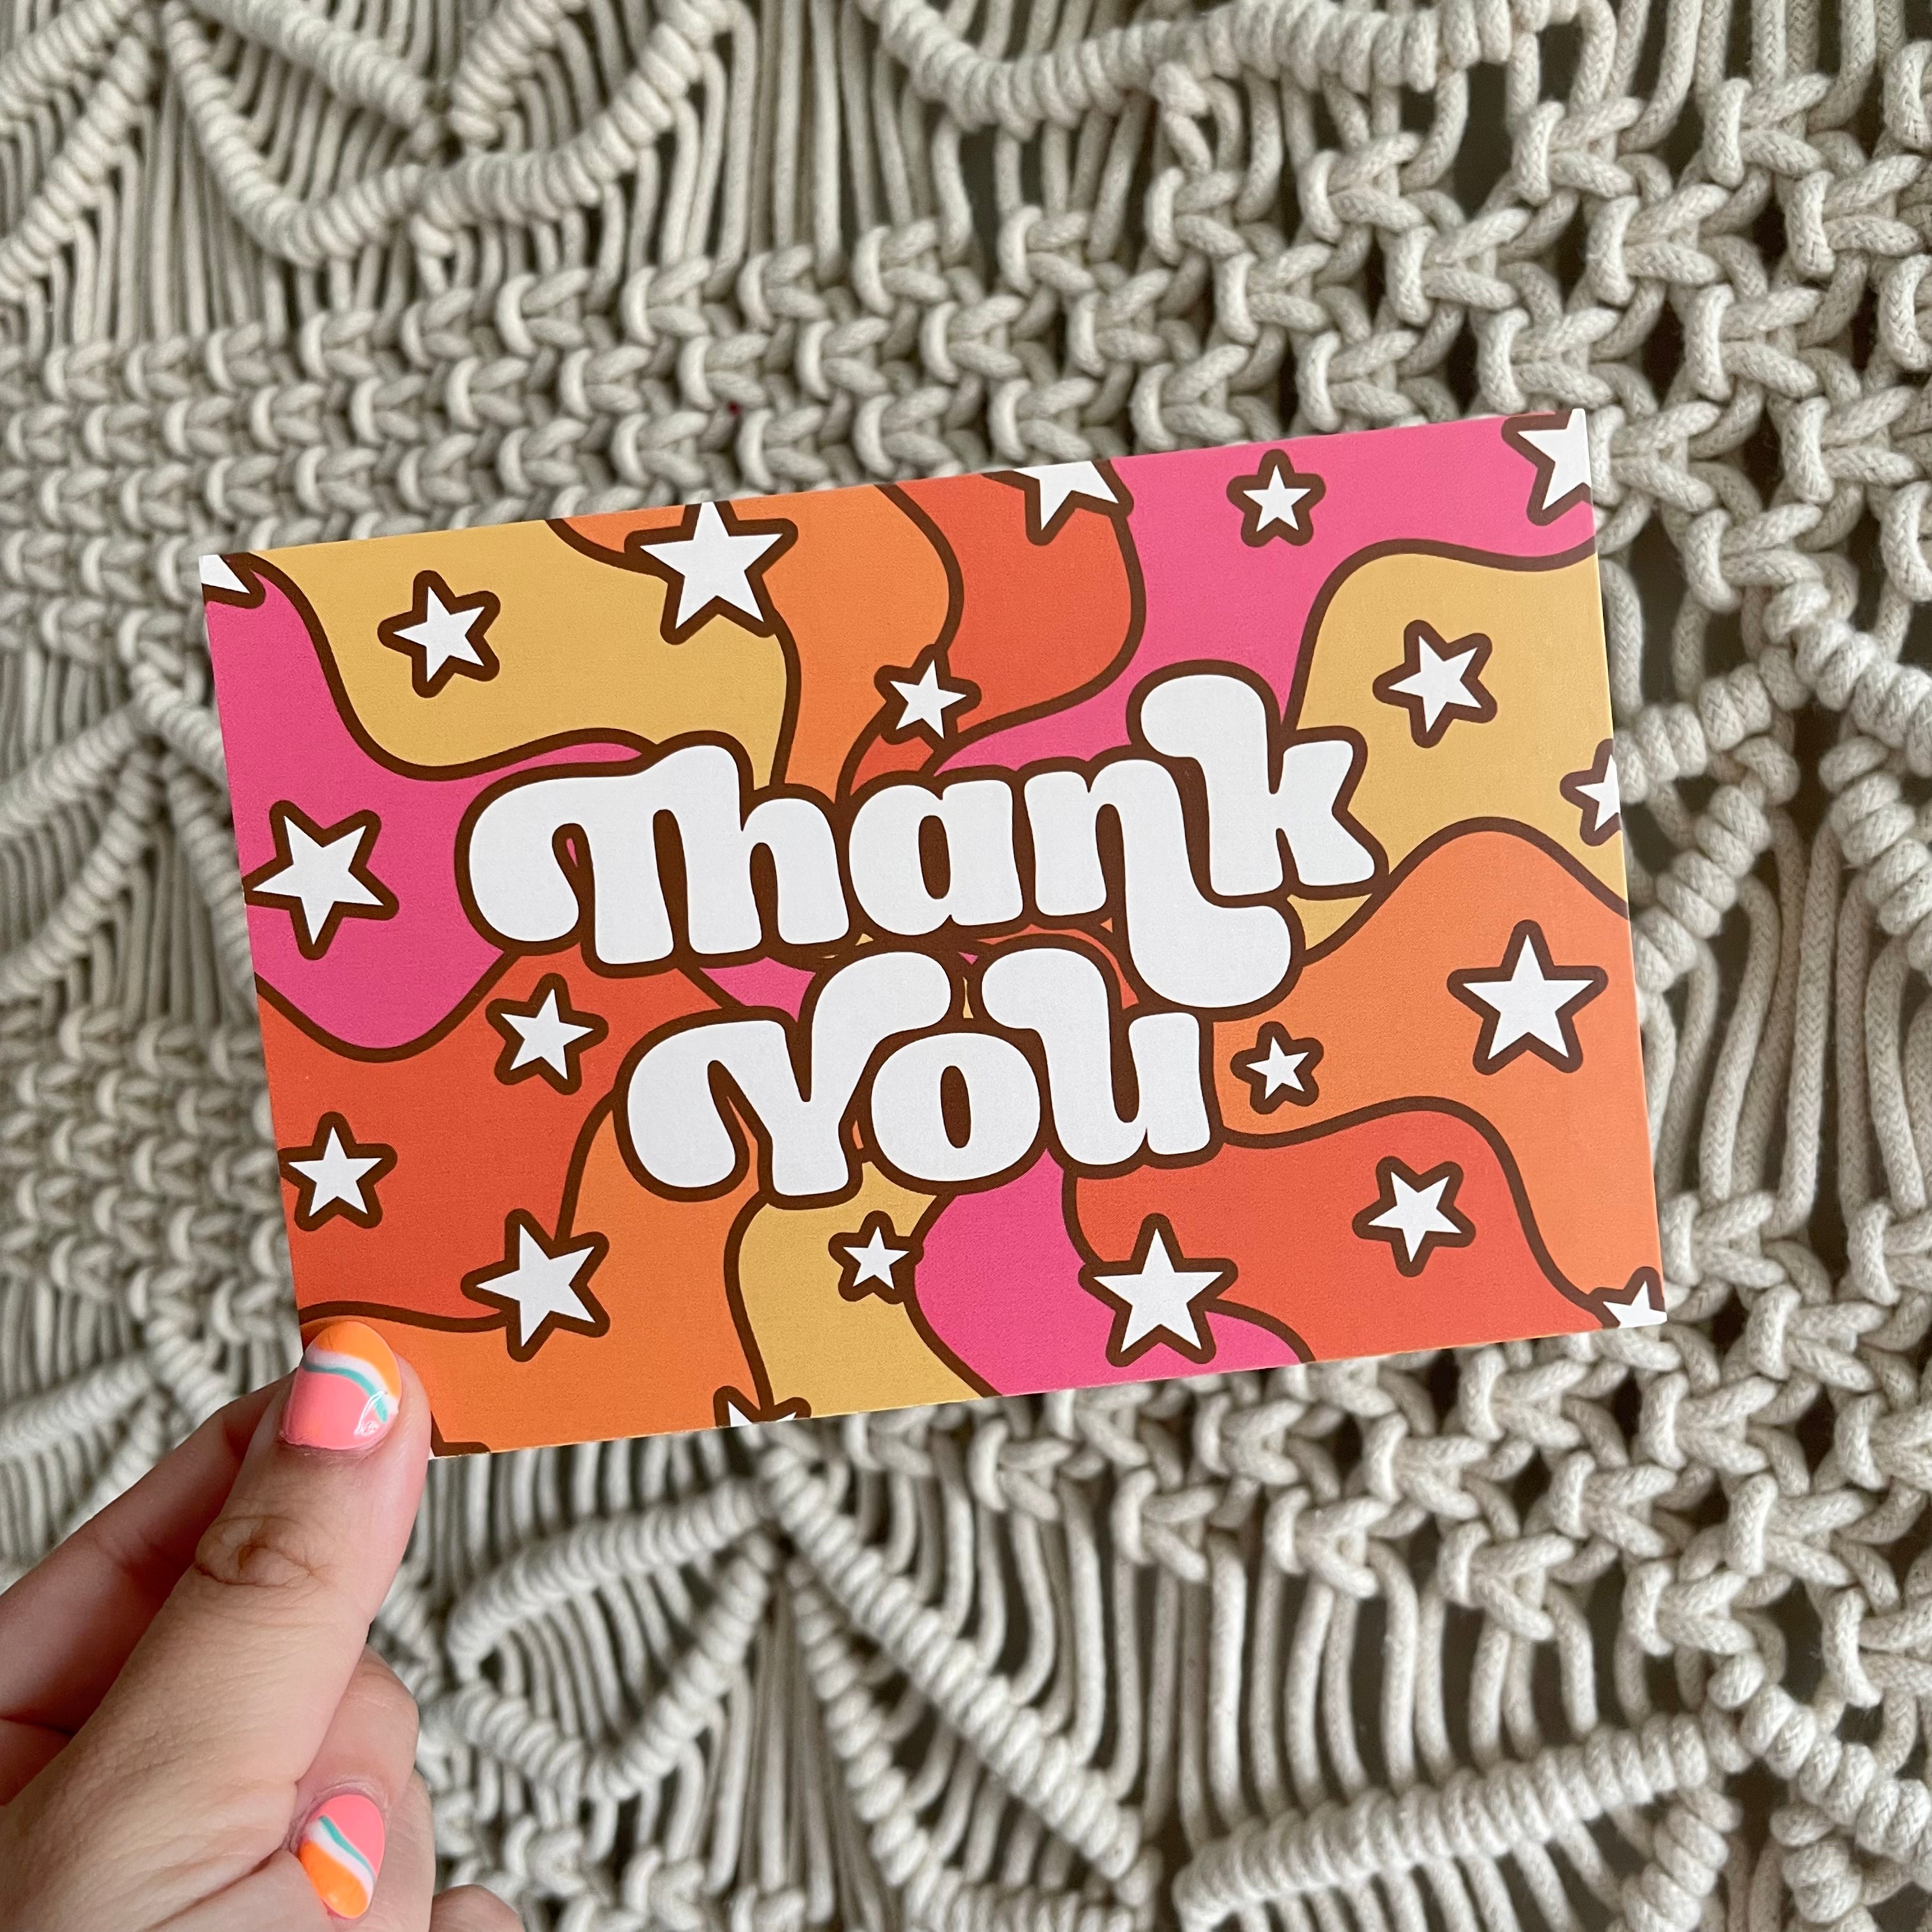 Retro Magic Thank you Insert Card - Magical Mailers